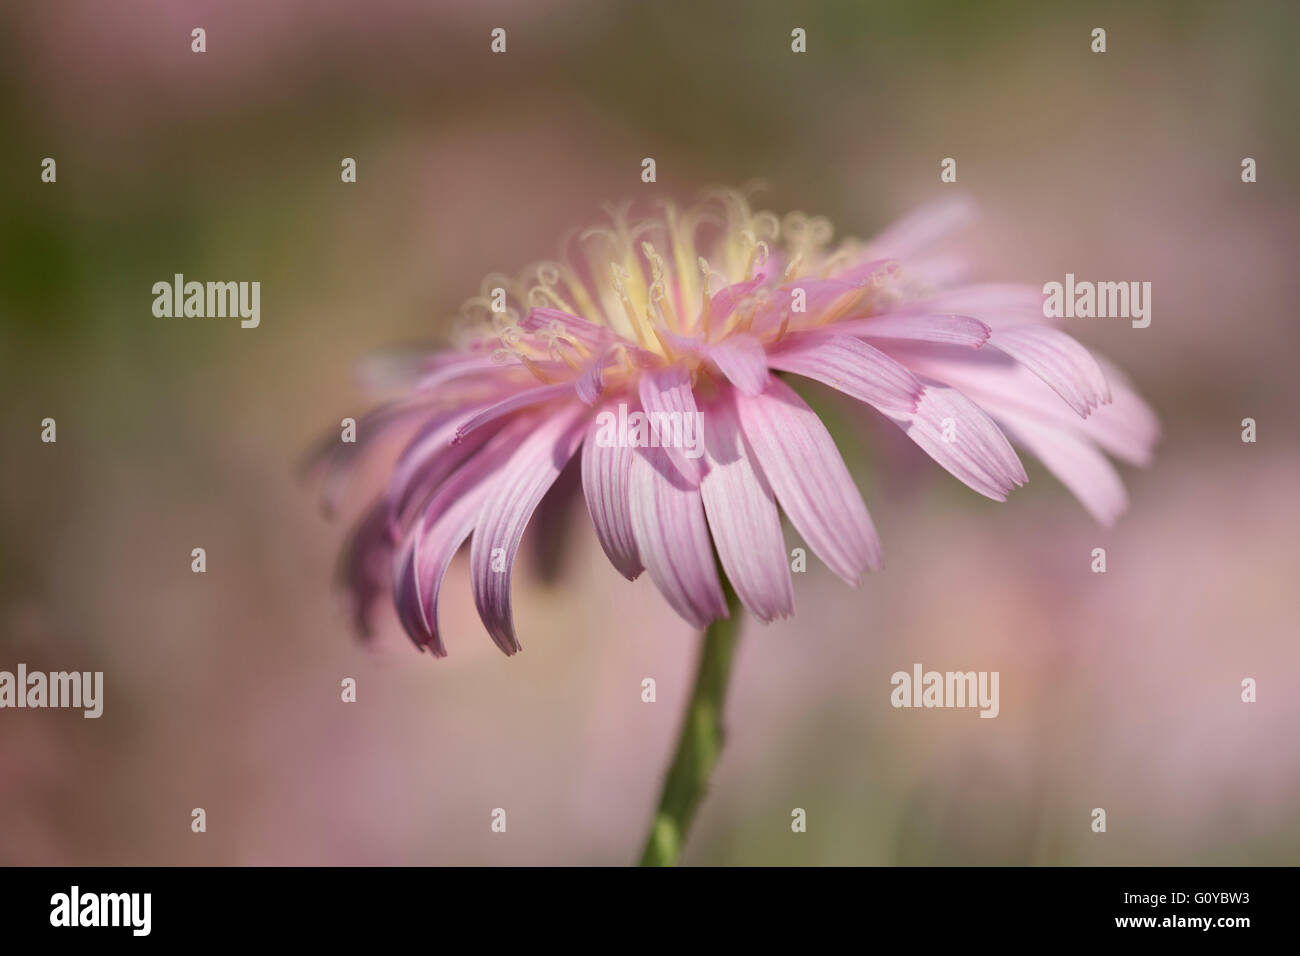 Pink dandelion, Crepis, Crepis incana, Beauty in Nature, Colour, Contemporary, Creative, Deciduous, Dreamlike, Flower, Autumn Flowering, Summer Flowering, Frost hardy, Greece Indigenous, Growing, Outdoor, Pastel Colour, Perennial, Plant, Stamen, Pink, Stock Photo